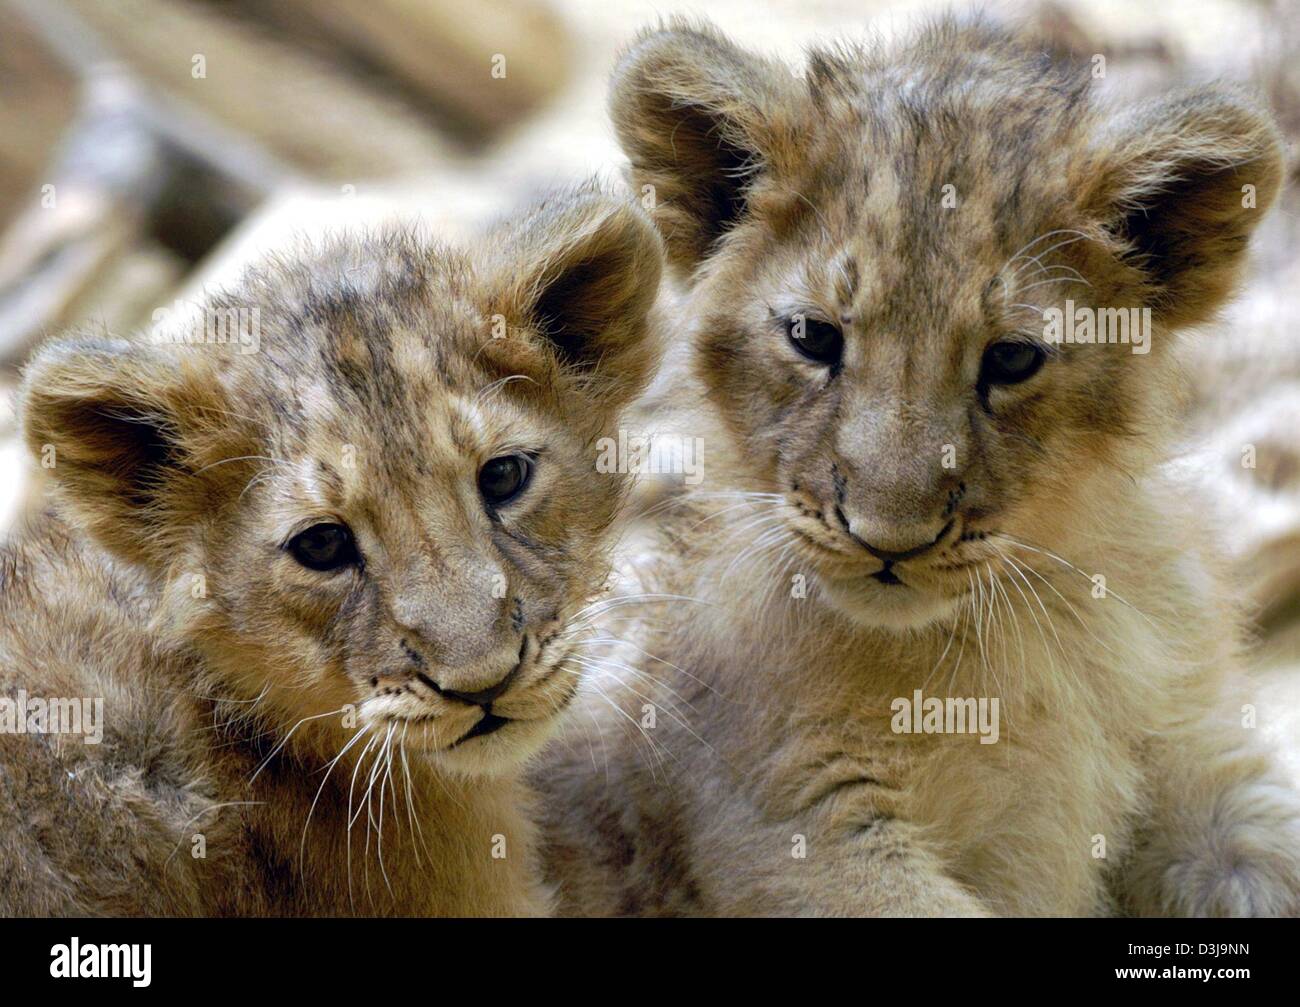 (dpa files) - Small lion siblings 'Princess Joy' and 'Prince Juan' smile a little tiredly after playing together at the Frankfurt, Germany, zoo, 17 March 2004. The offspring, which was born in Frankfurt last December, will be allowed in the outside enclosure once the temperatures rise to appropriate levels. Stock Photo